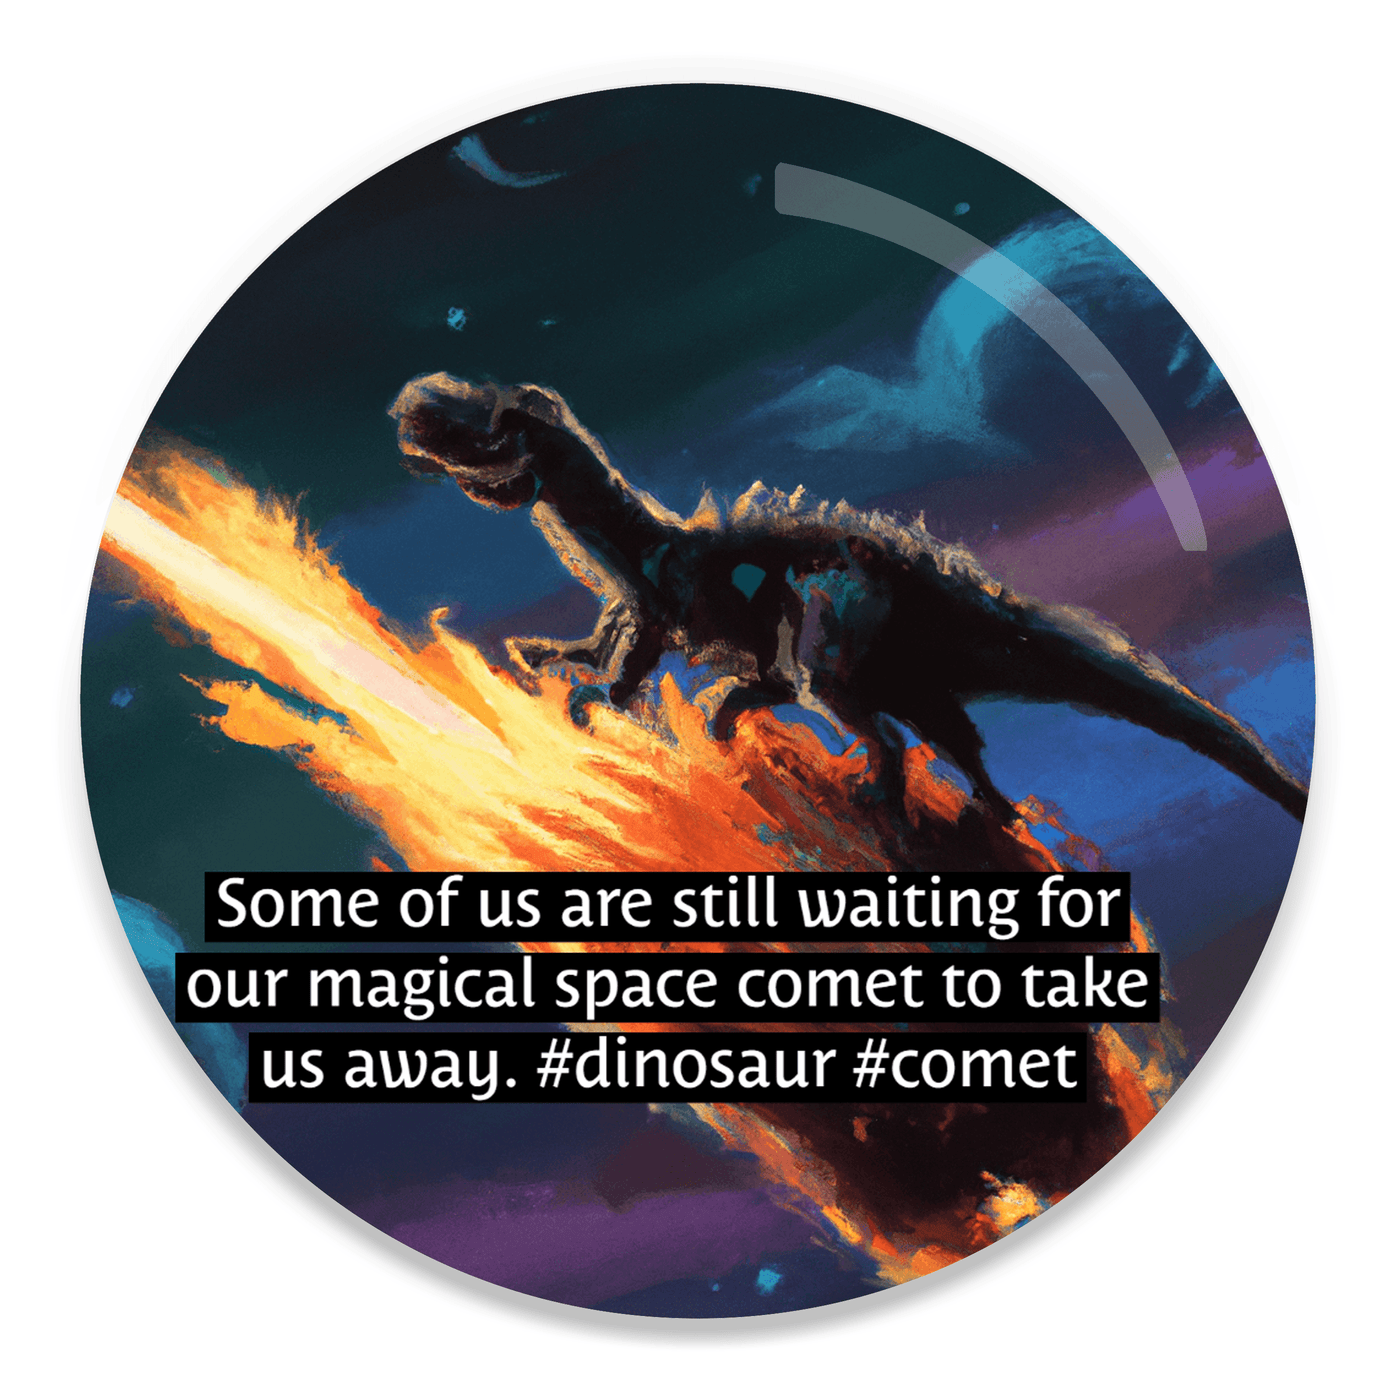 2.25 inch round colorful magnet with image of a dinosaur riding a comet